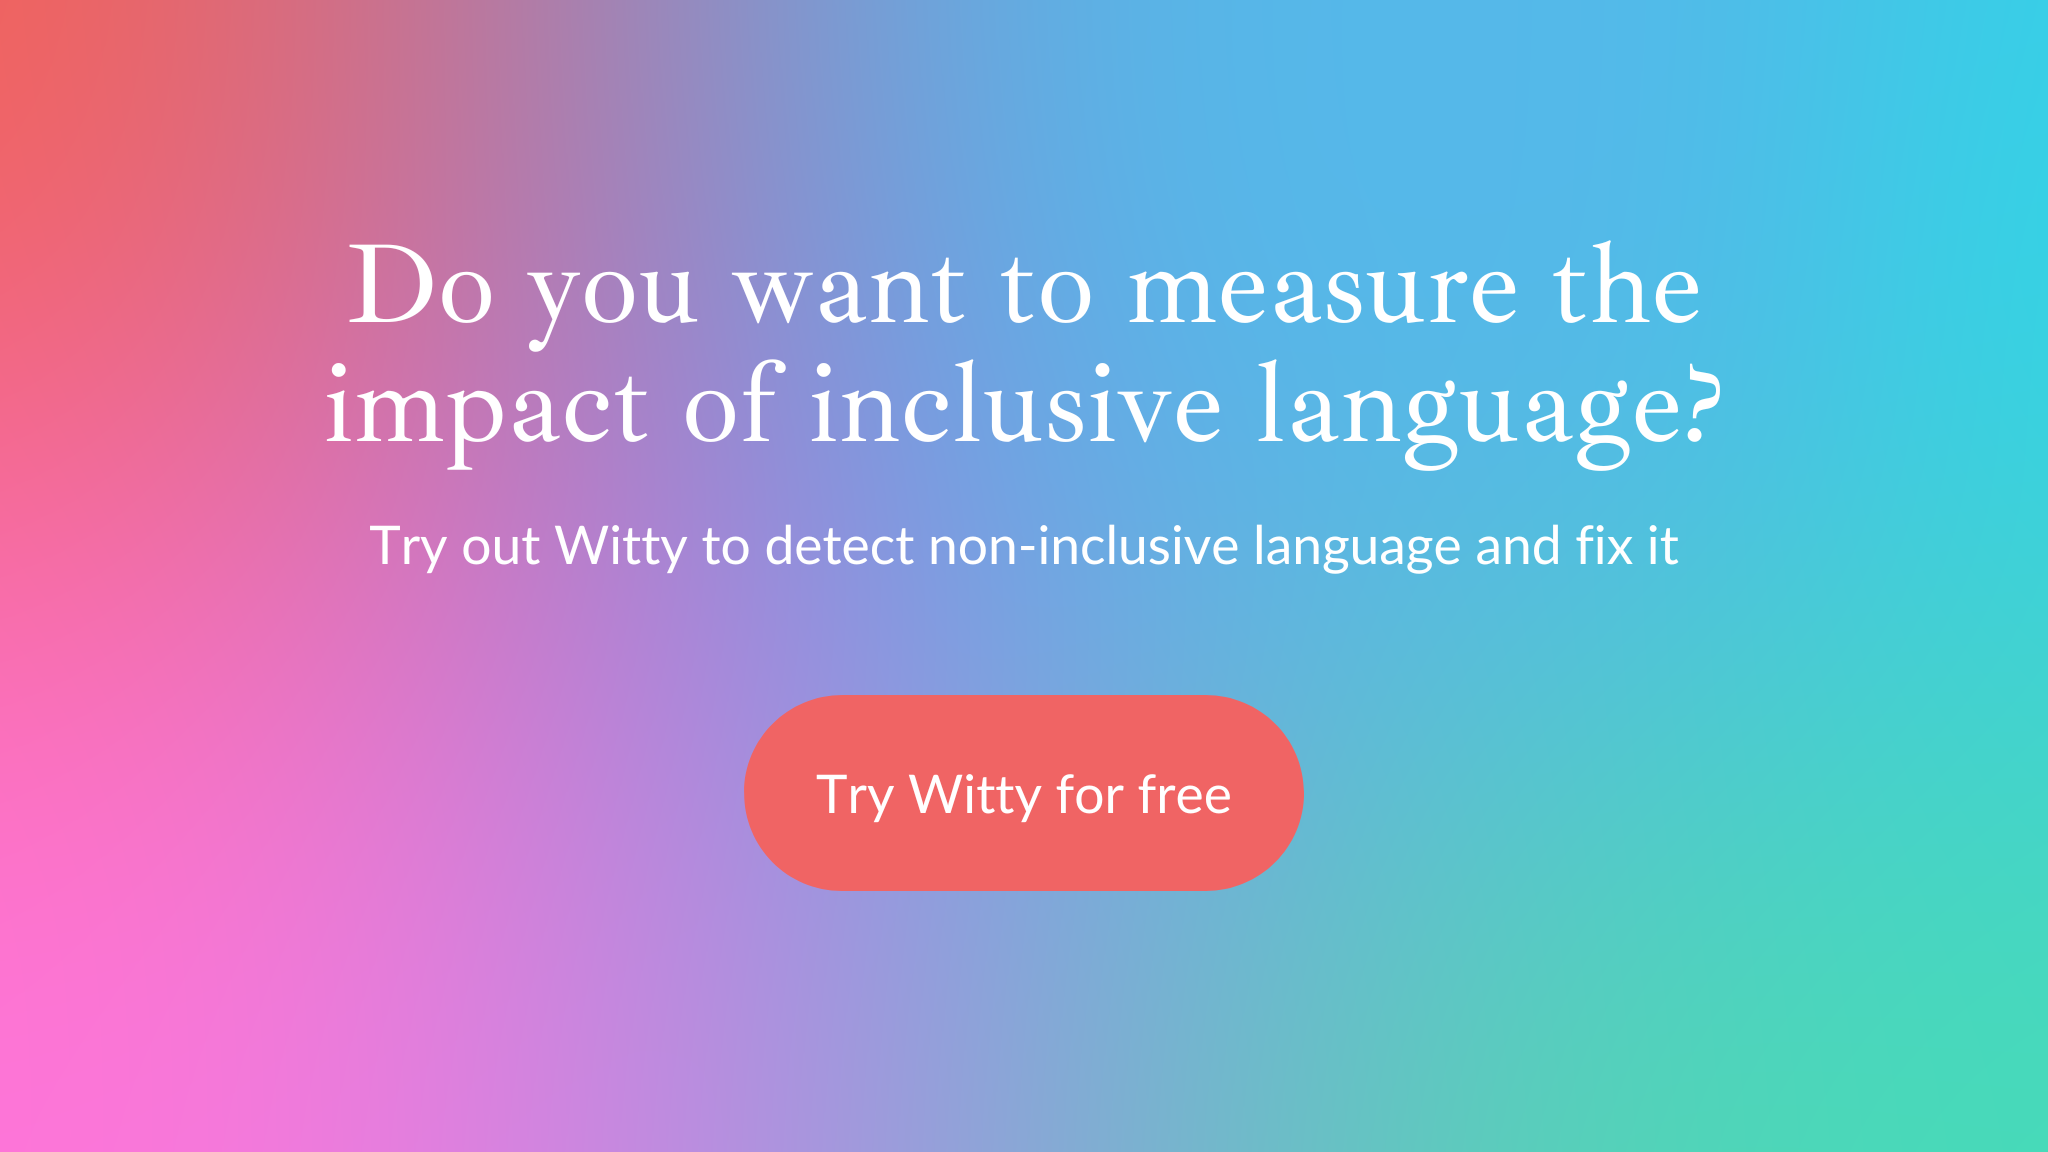 Do you want to measure the impact of inclusive language?